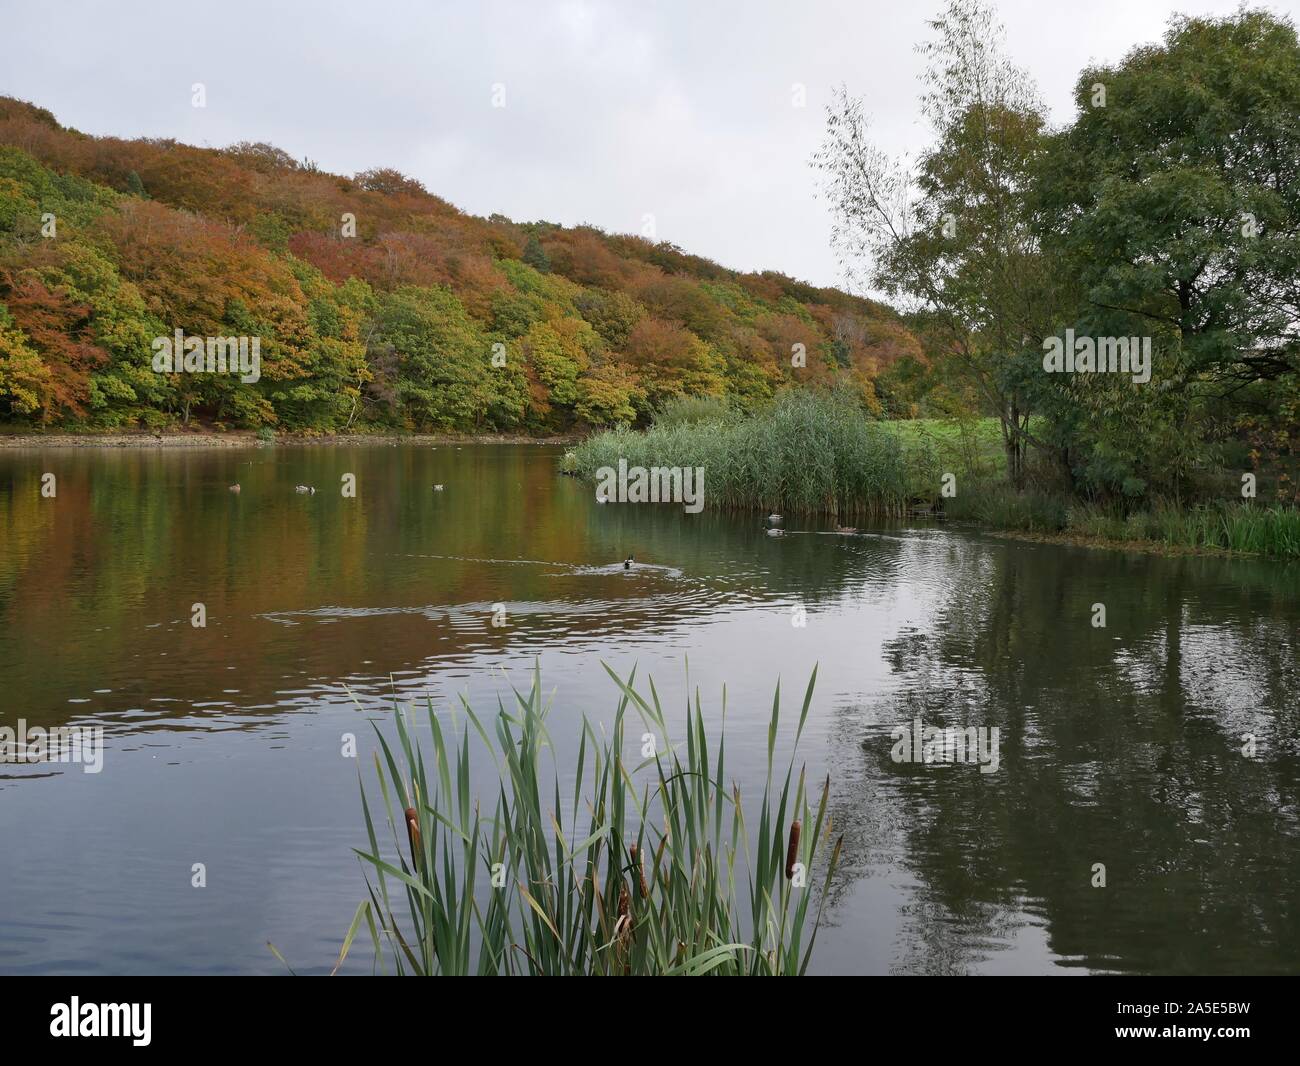 Reflections of trees in their autumn fall colours in the lake with ducks and bankside reeds and bullrushes Stock Photo